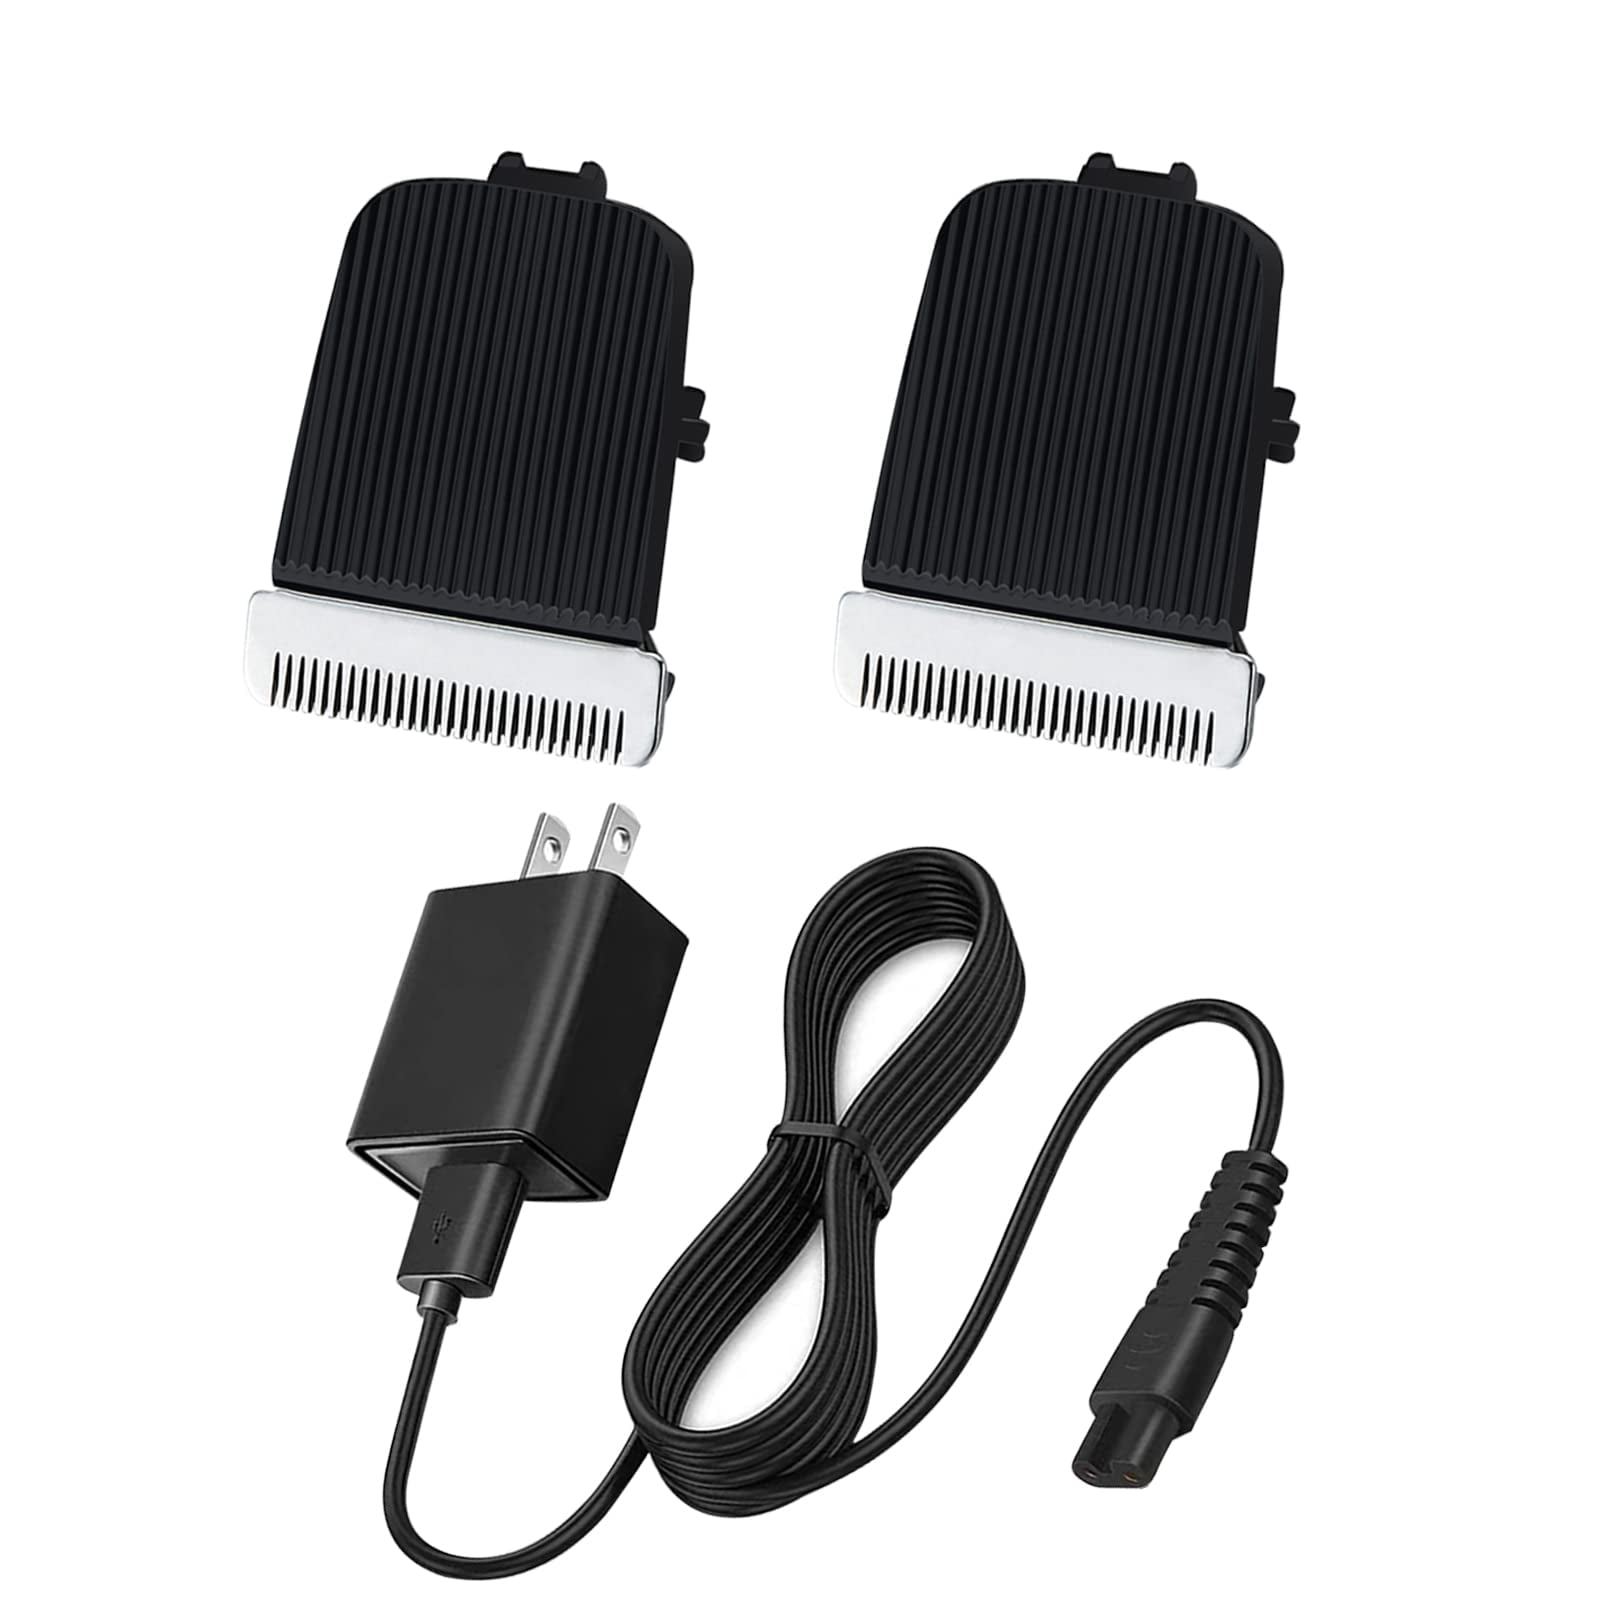 Amazon.com: USB Charger-Cable Fit for Hatteker-Cordless-Hair-Trimmer Pro Hair  Clippers Beard Trimmer RFC-588 RFC-598 RFC-692 Shaver Razor Replacement  Charging Power-Cord : Beauty & Personal Care